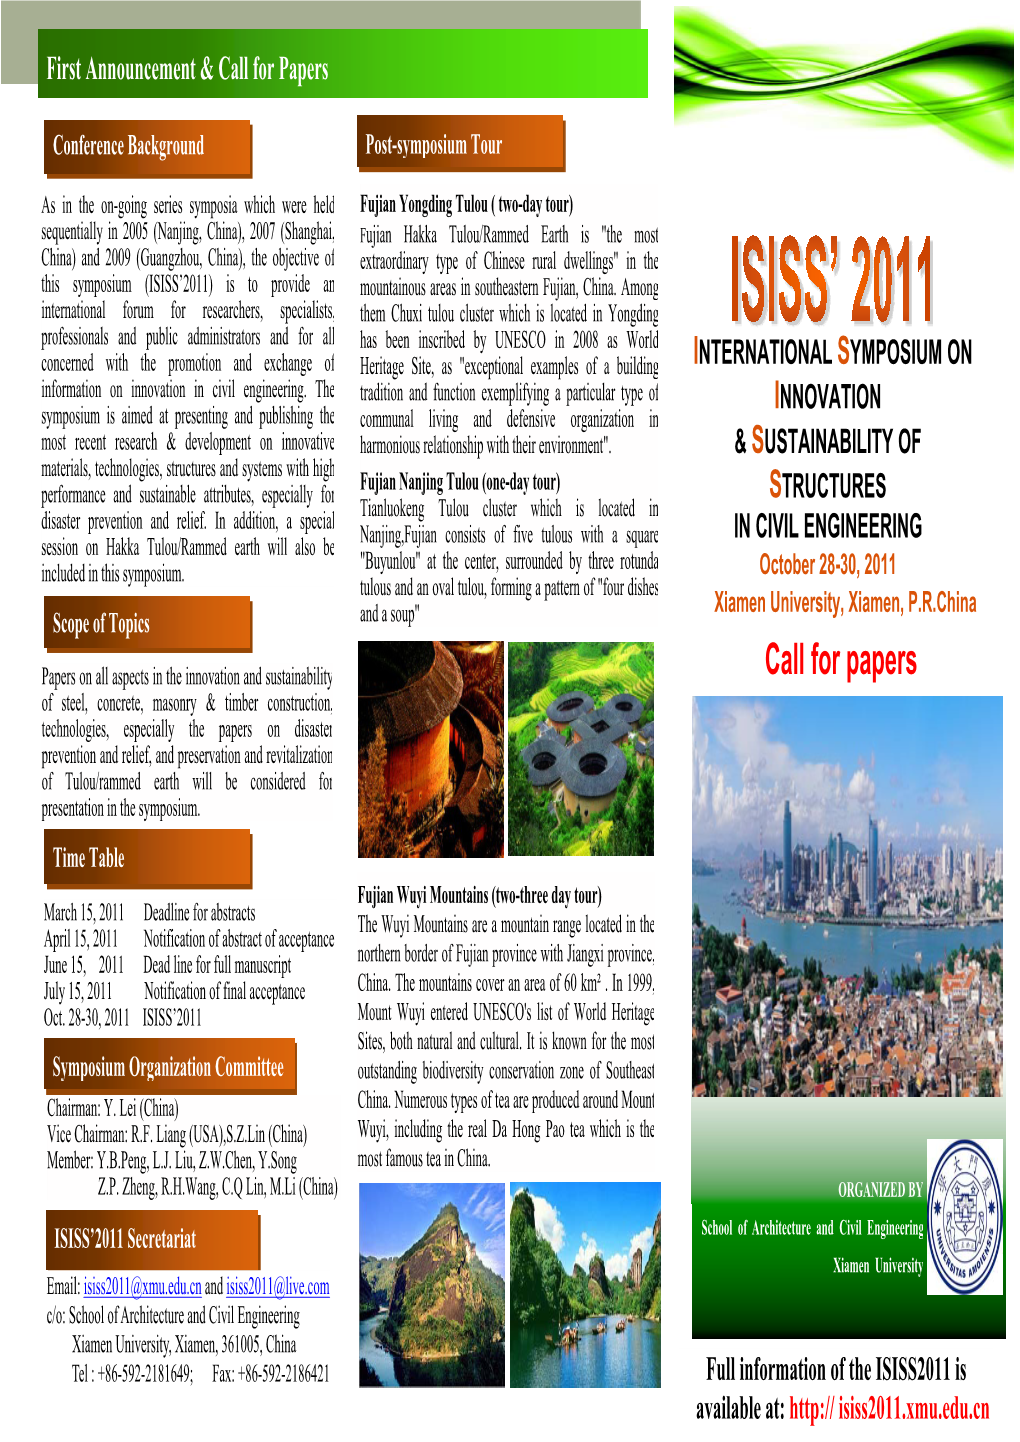 F:\ISISS'2011\First Announcement & Call for Papers ISISS'2011